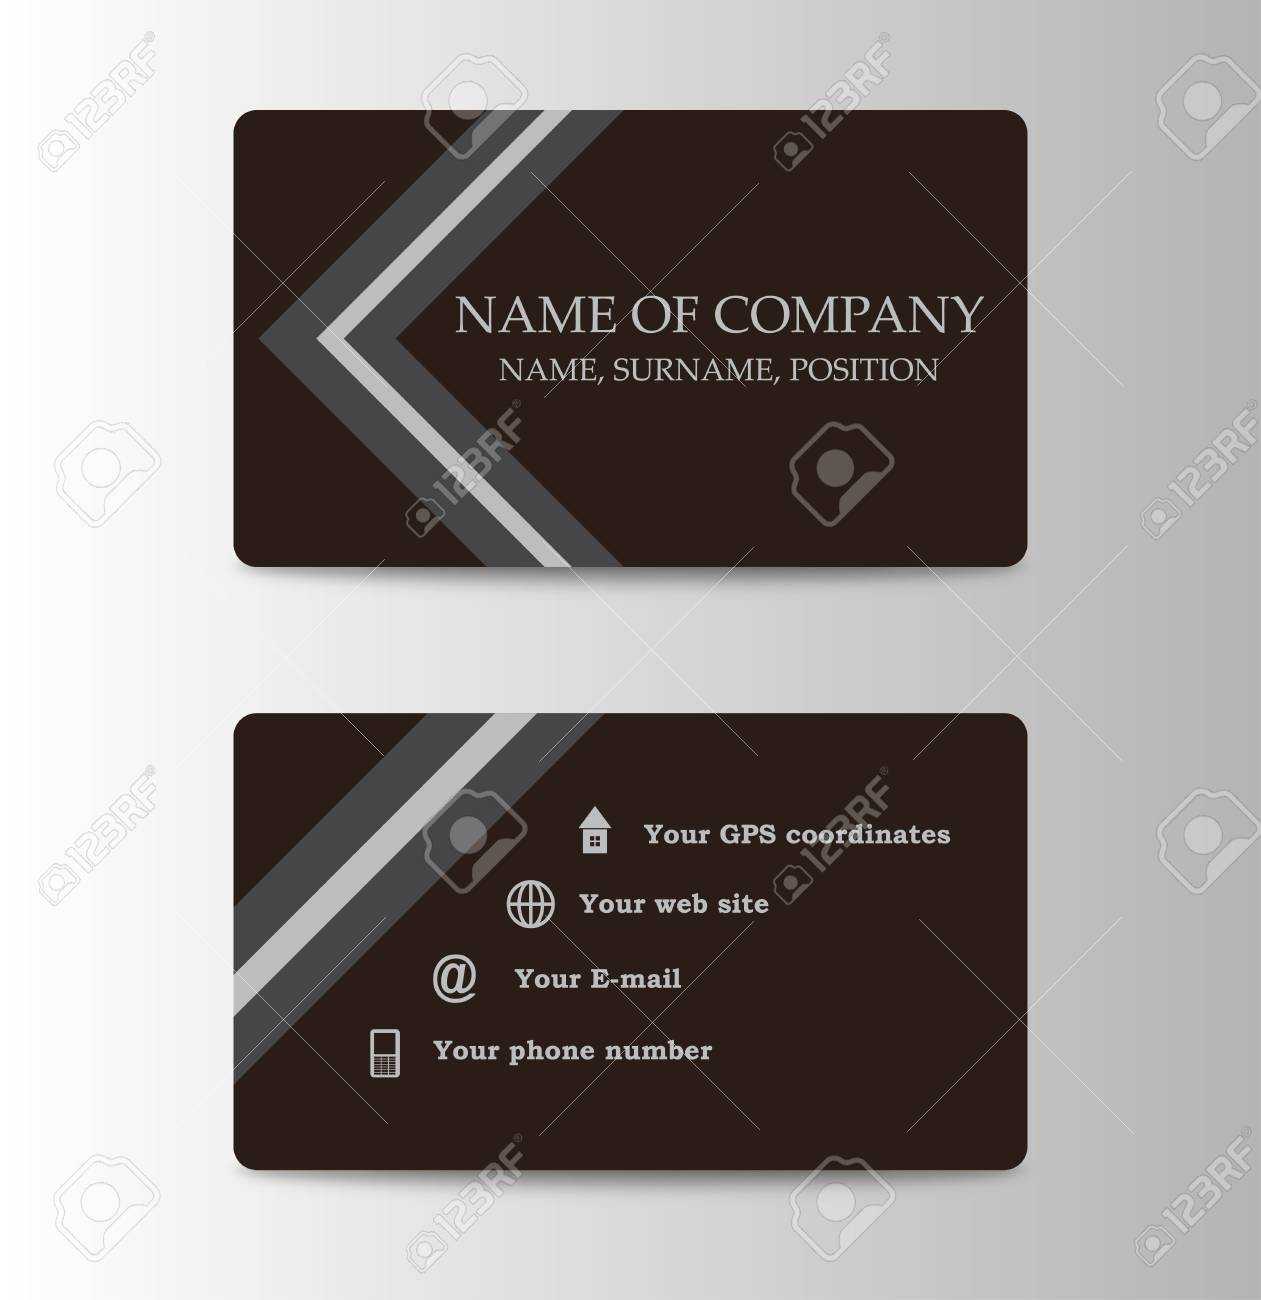 Corporate Id Card Design Template. Personal Id Card For Business.. In Personal Identification Card Template